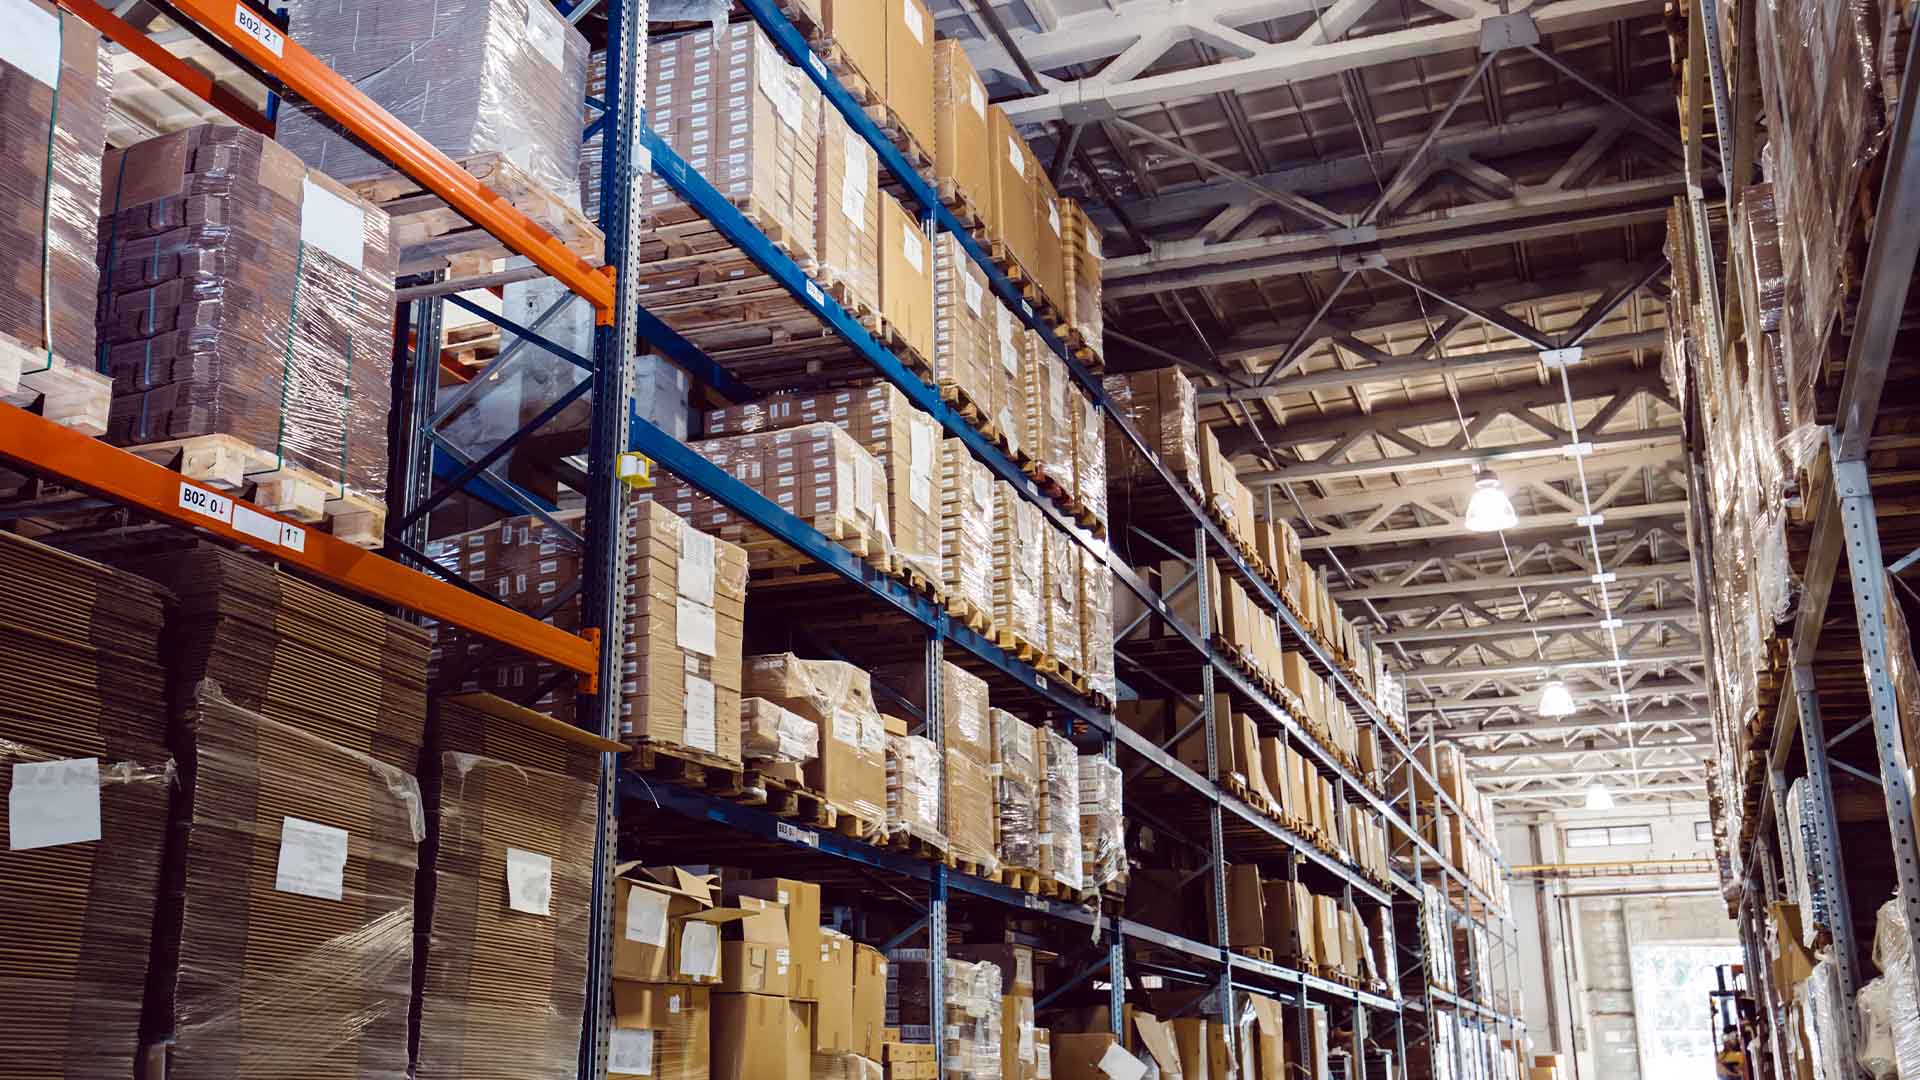 Photo of a warehouse